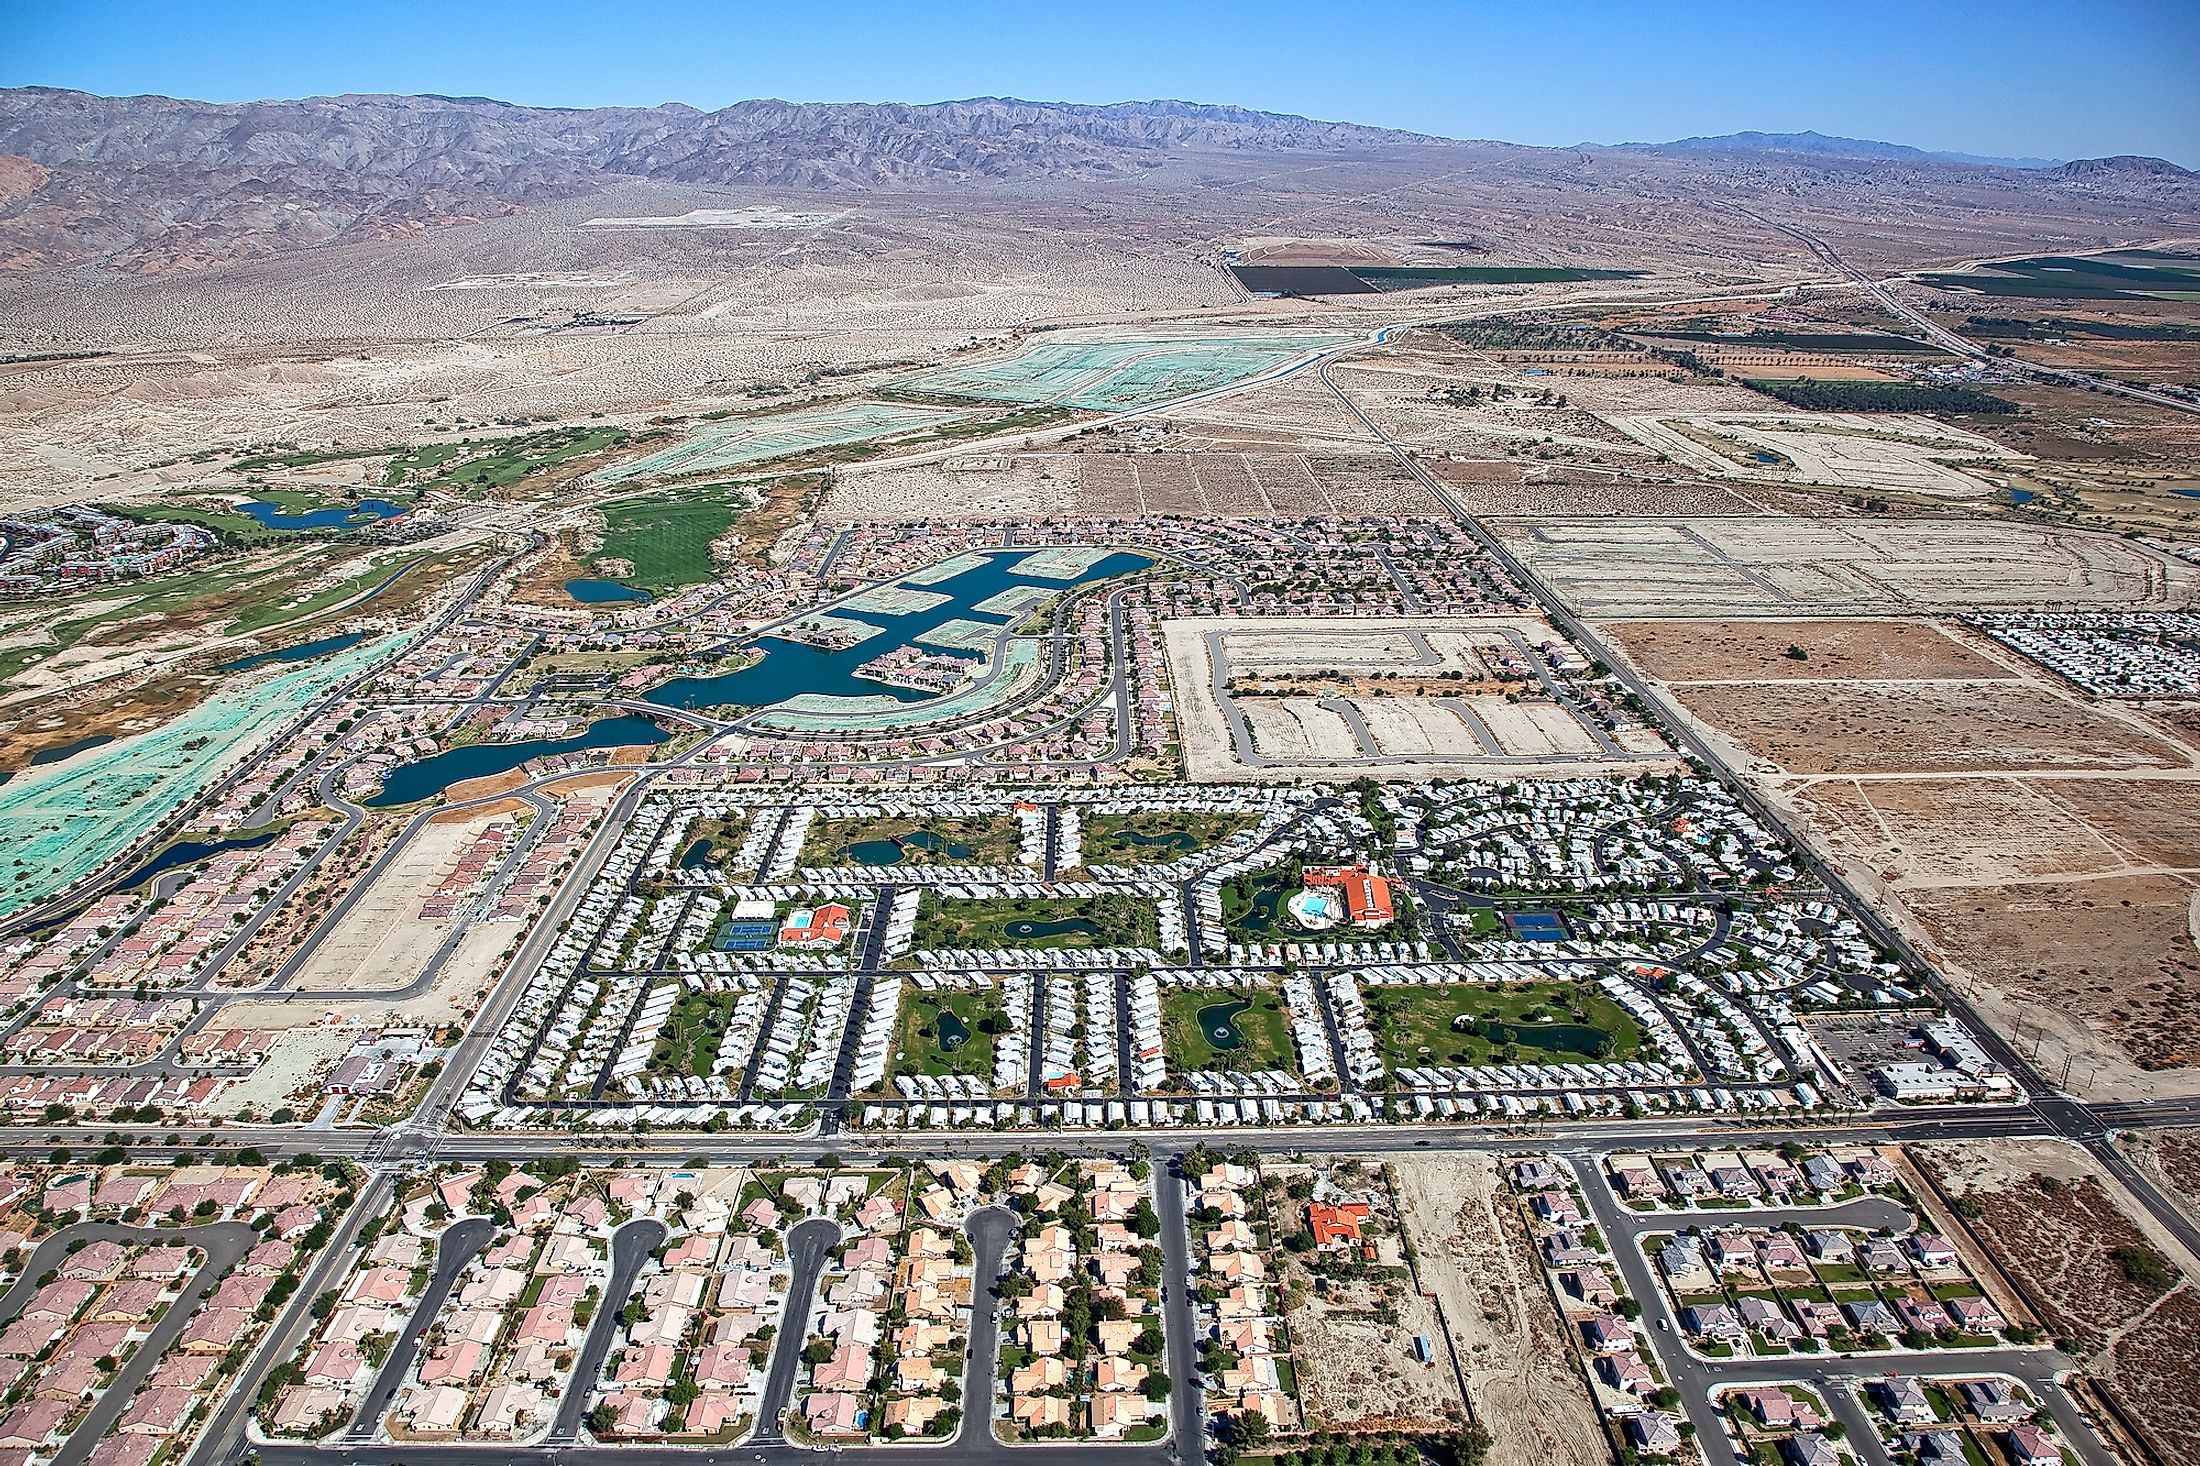 Coachella Valley and Indio Hills aerial view